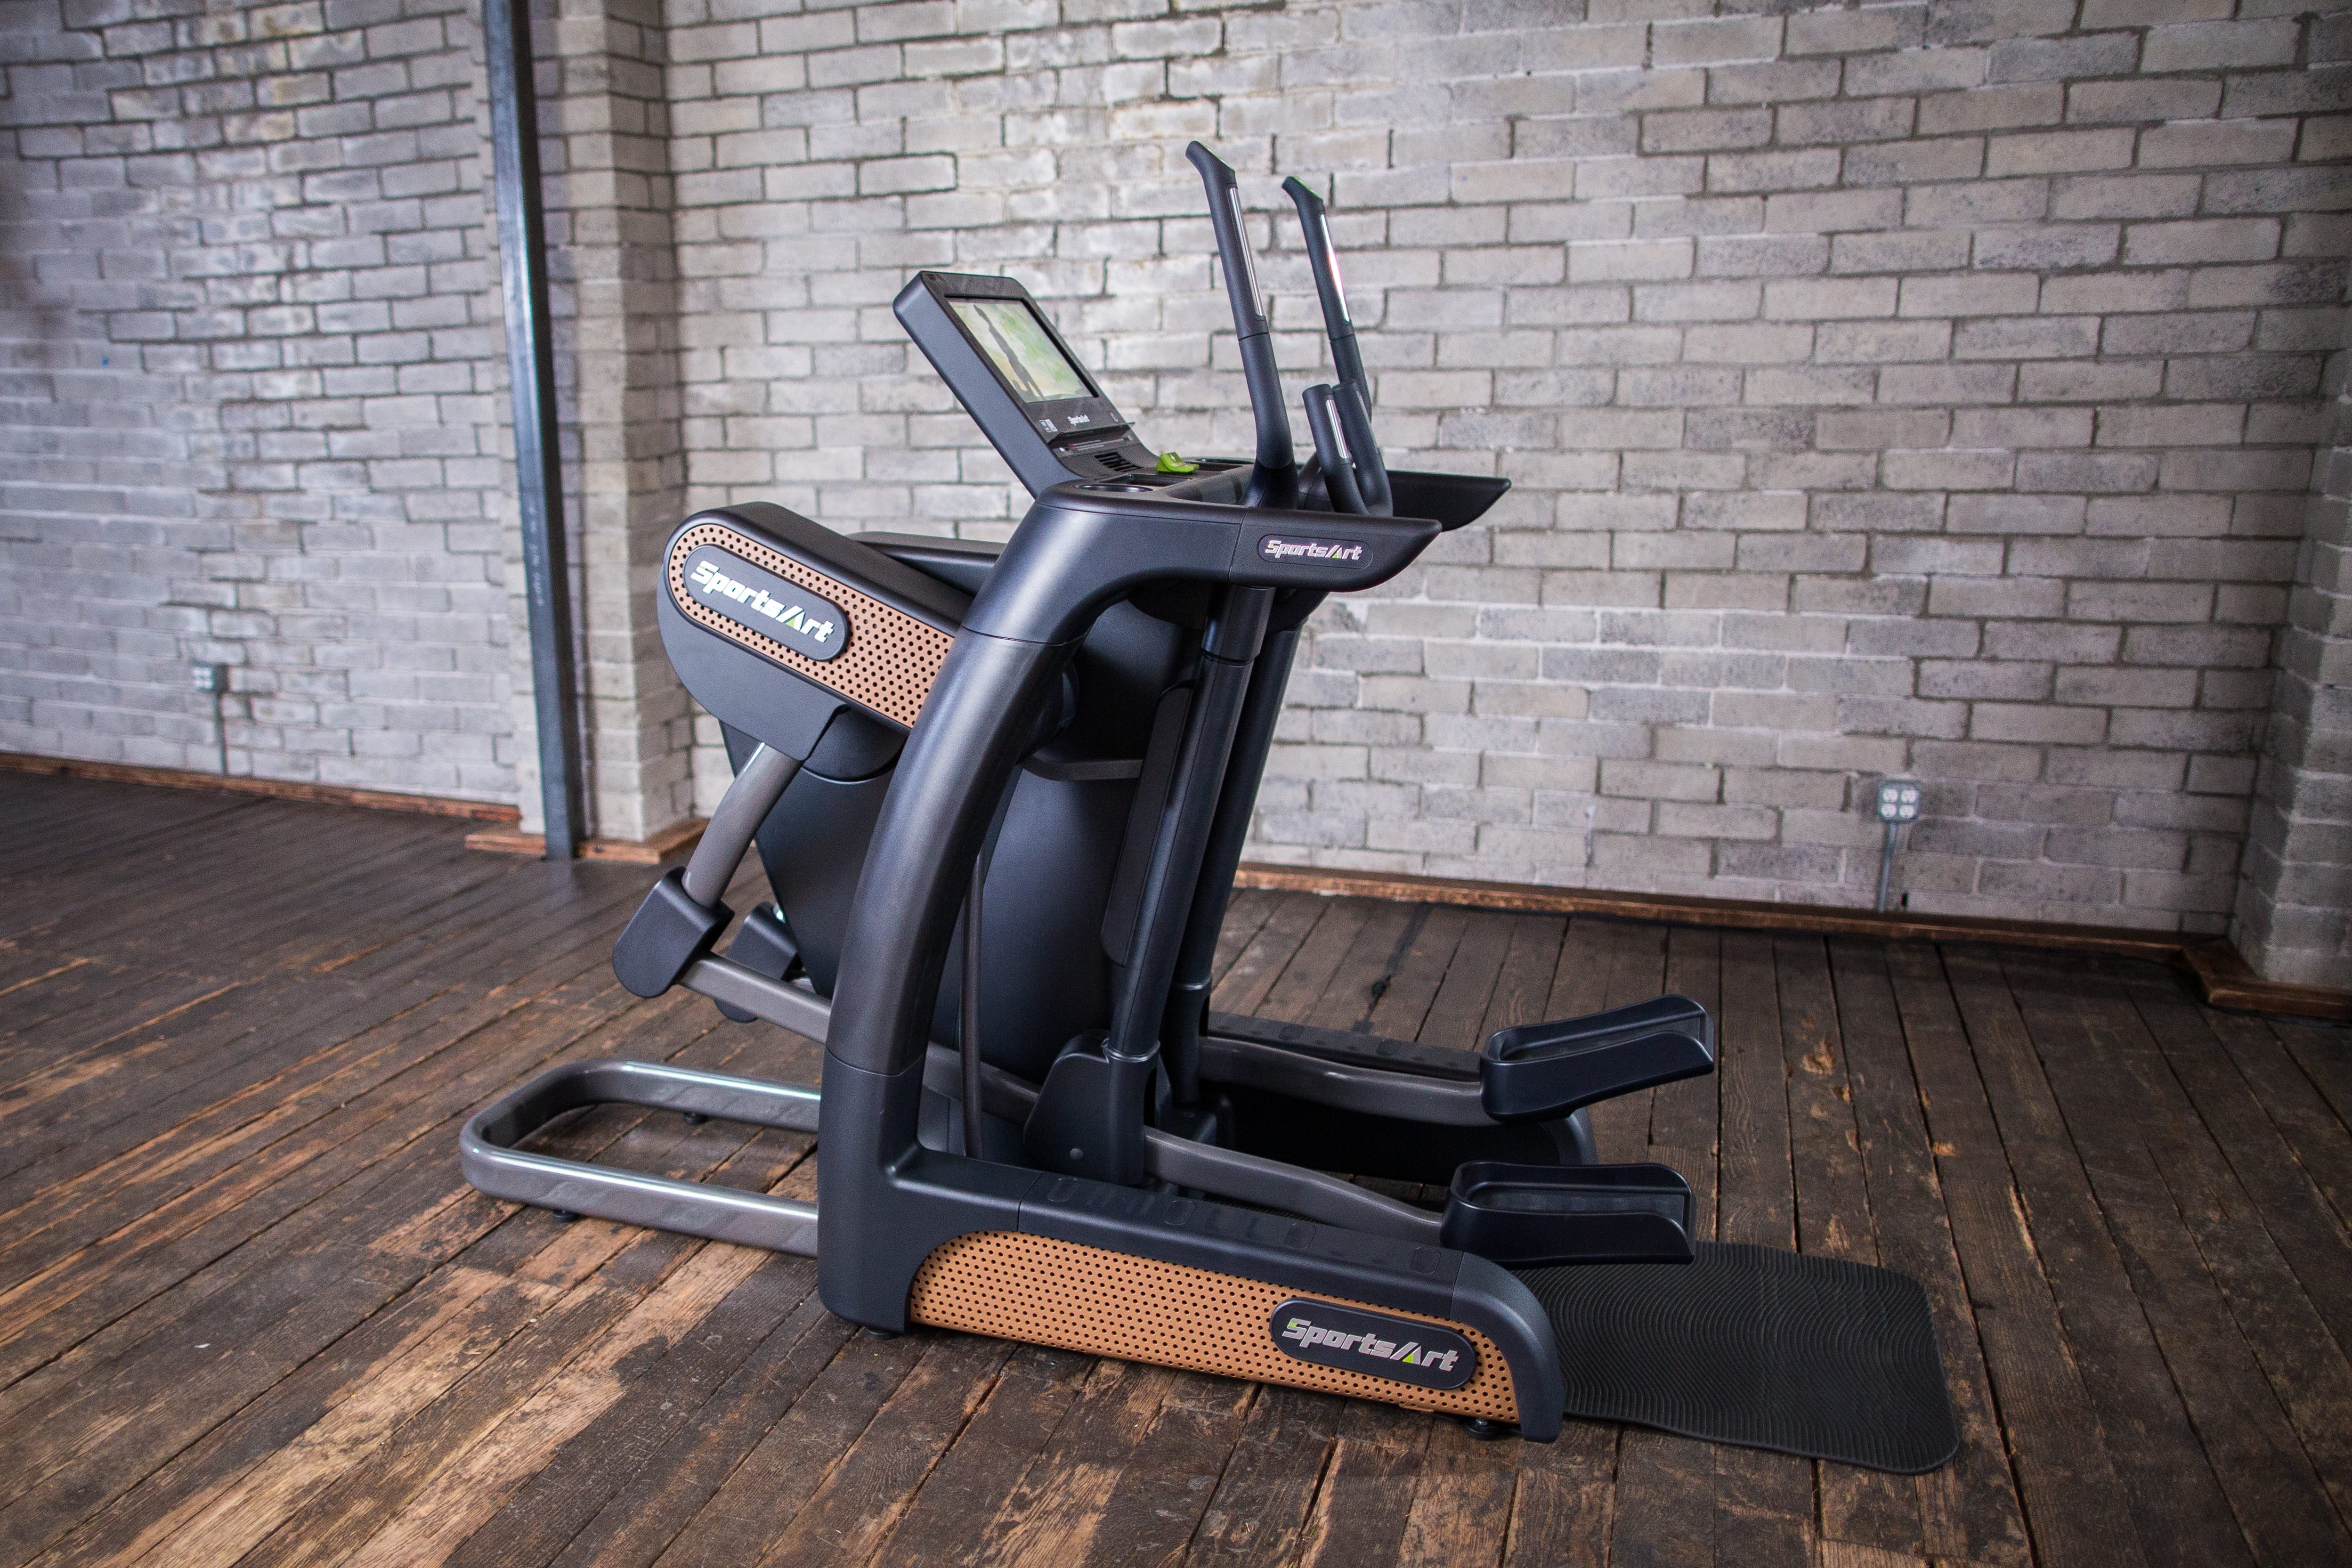 SportsArt Verso Status Senza Cross Trainer-16 inch V886-16-1 side view inside a home gym 